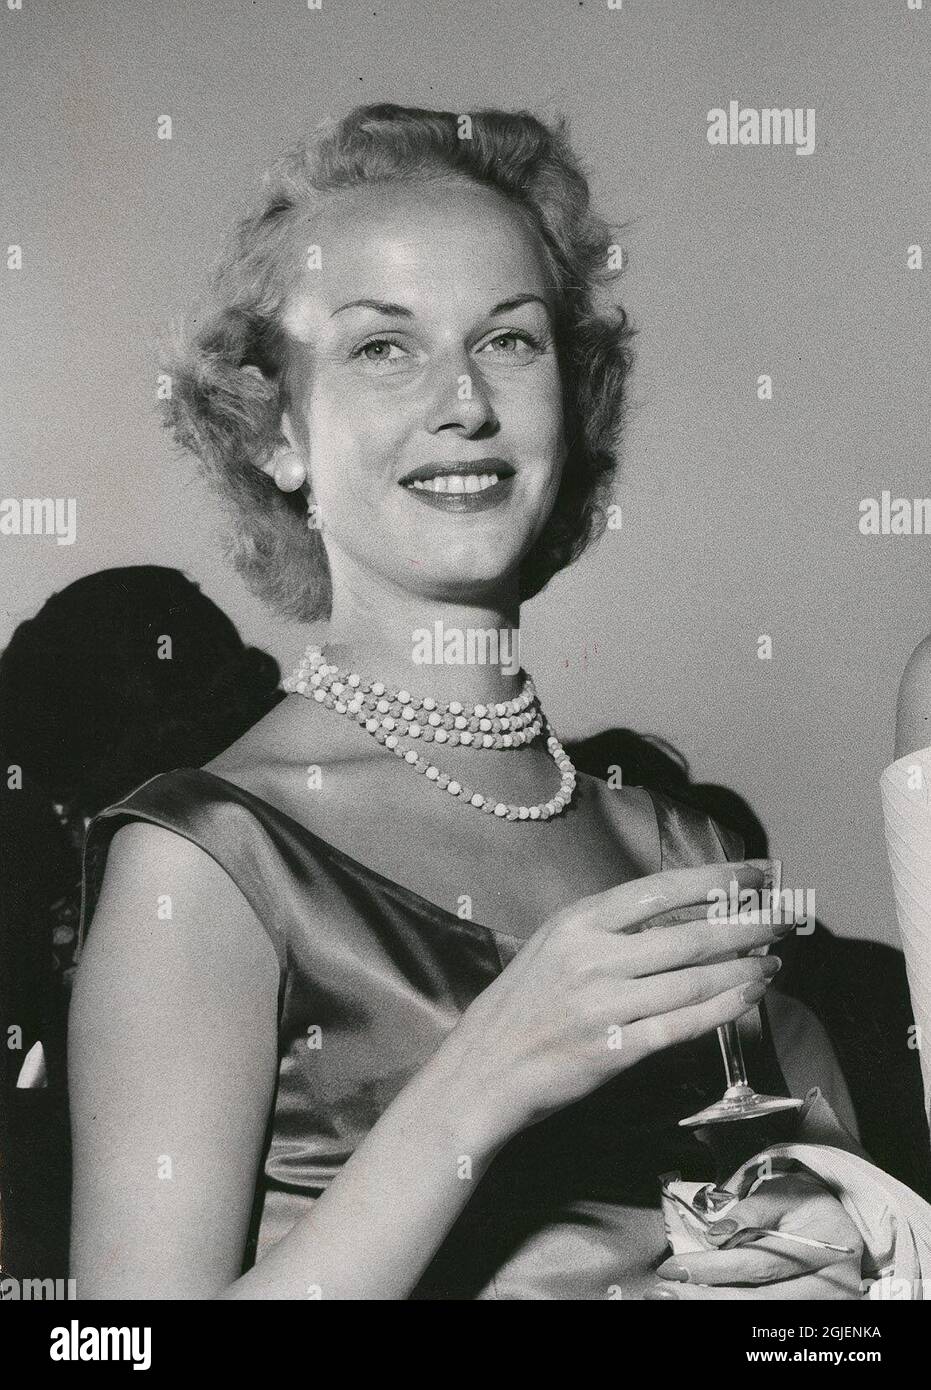 An undated picture of Miss Gunilla von Post at a pool party. Stock Photo